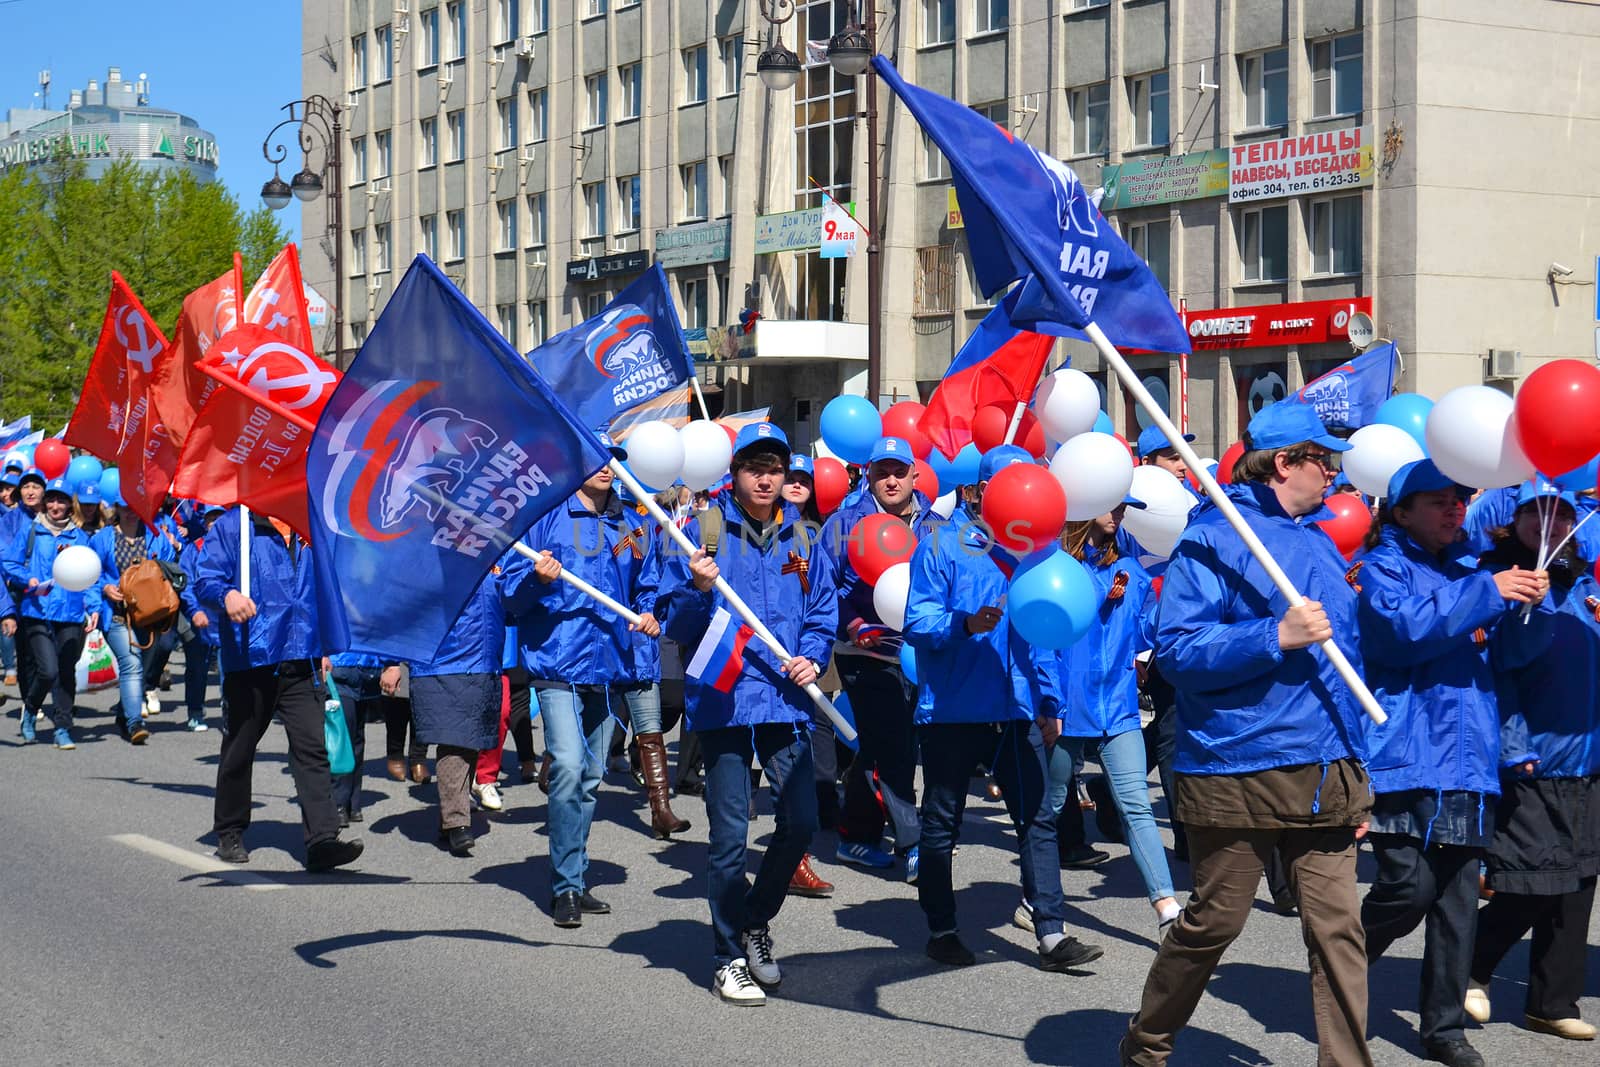 Parade on the Victory Day on May 9, 2016. Representatives of Uni by veronka72